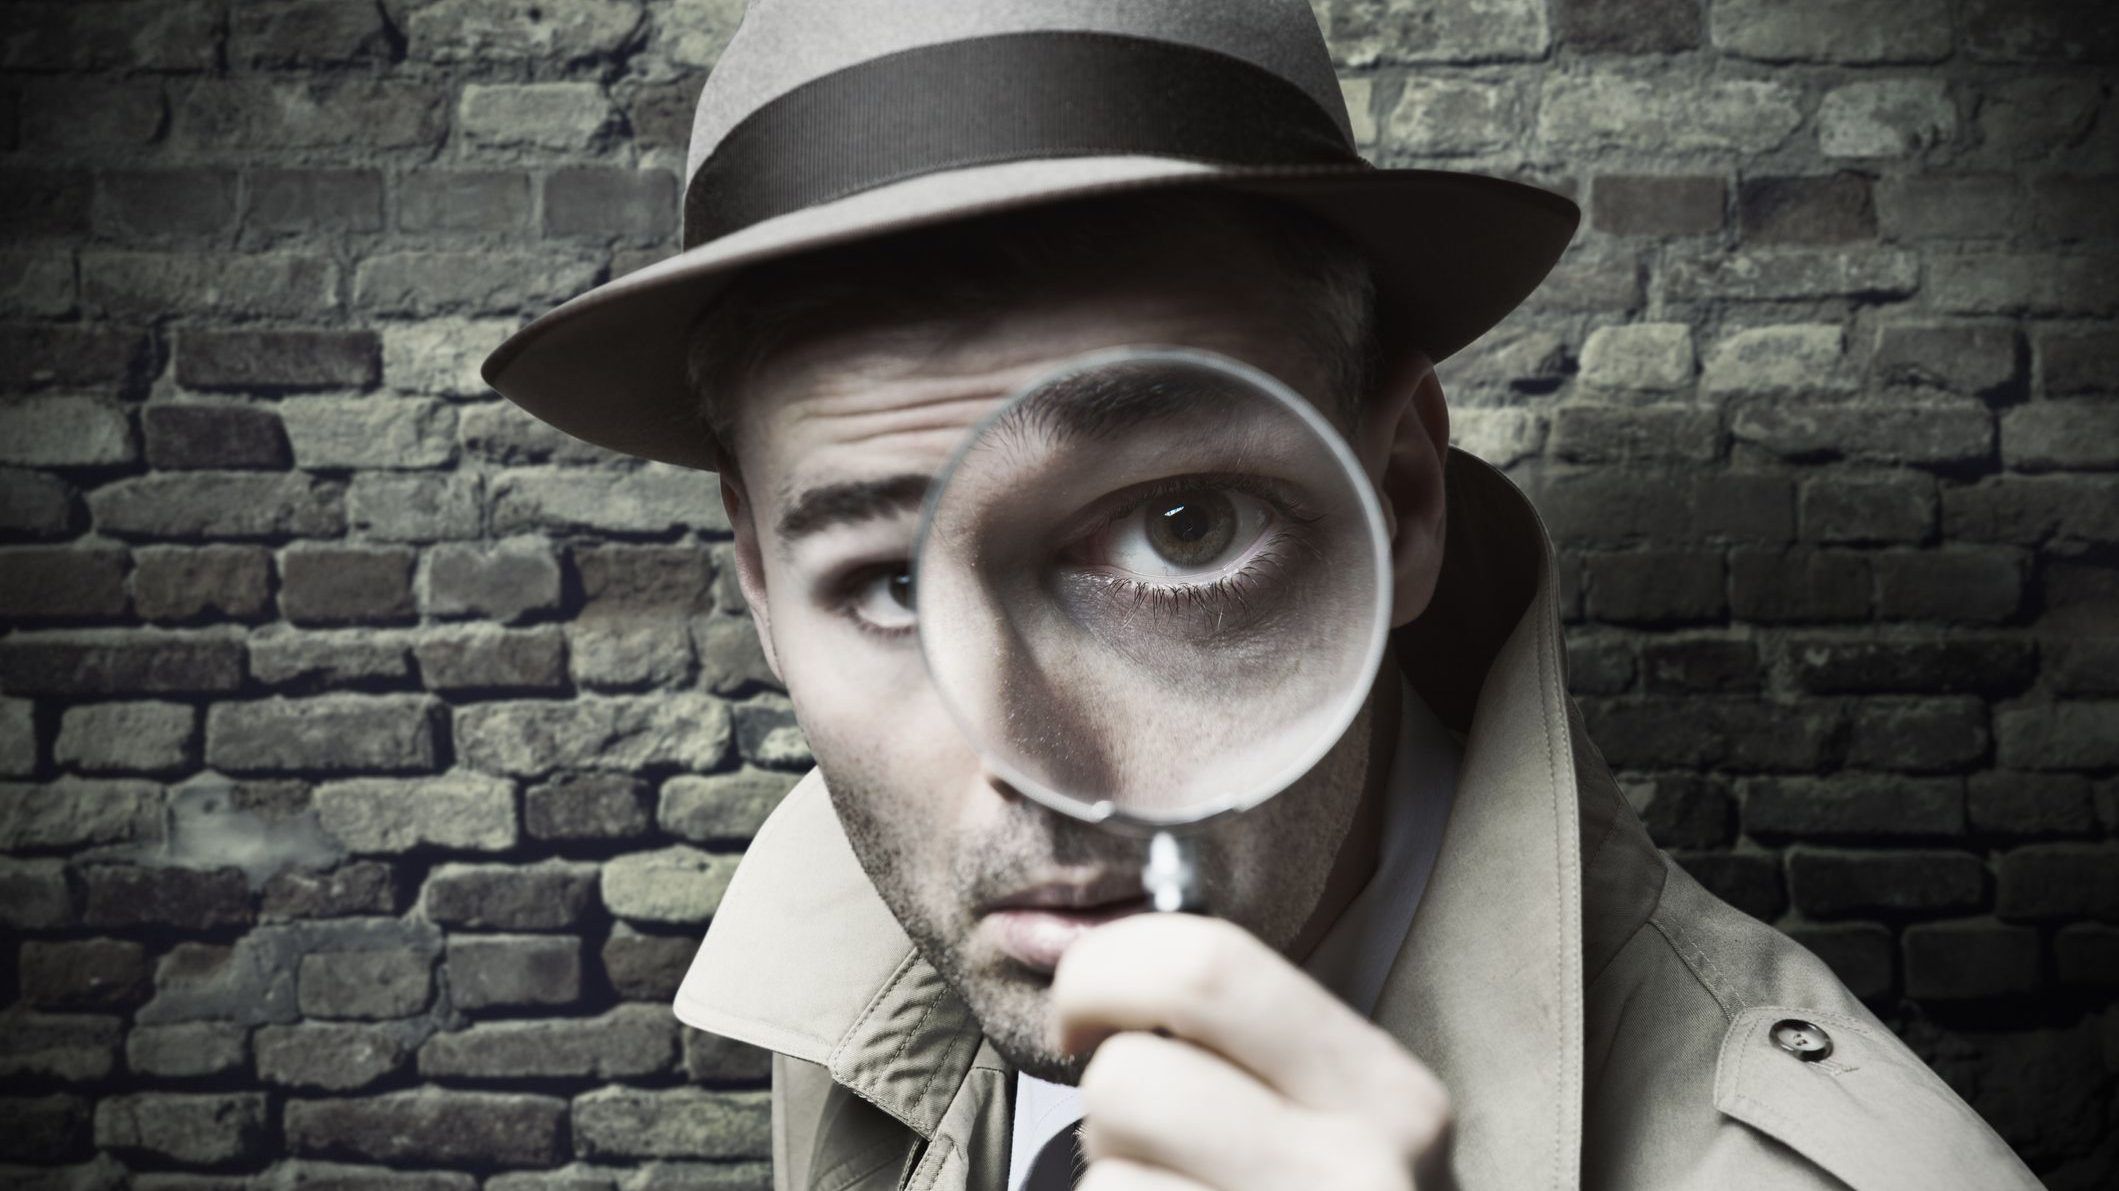 Vintage detective looking through a magnifier